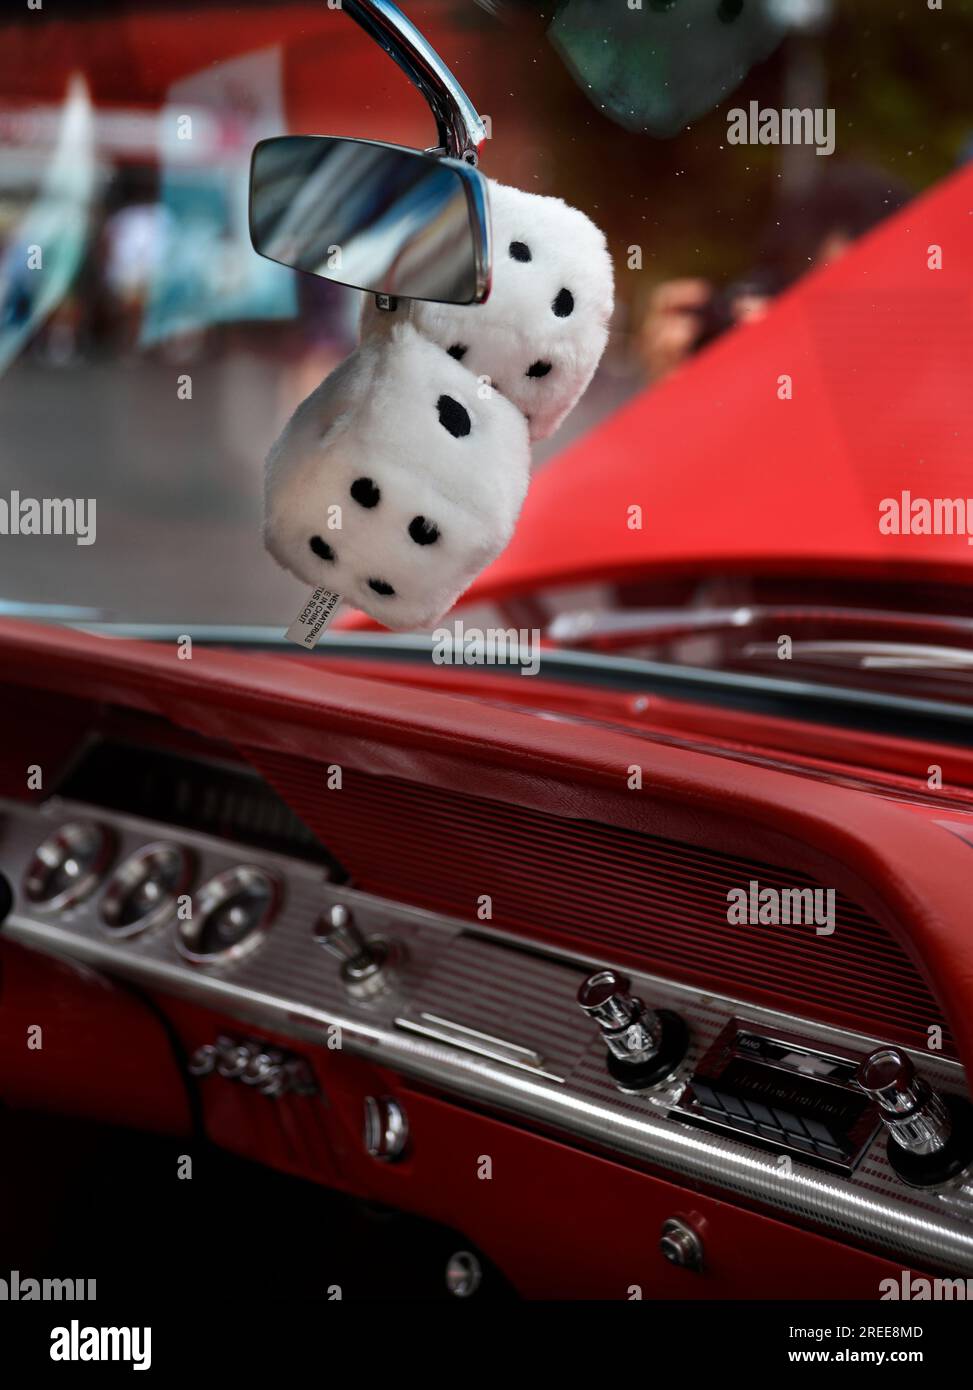 Fuzzy Dice On The Rearview Mirror Dashboard Fur Chrome Photo